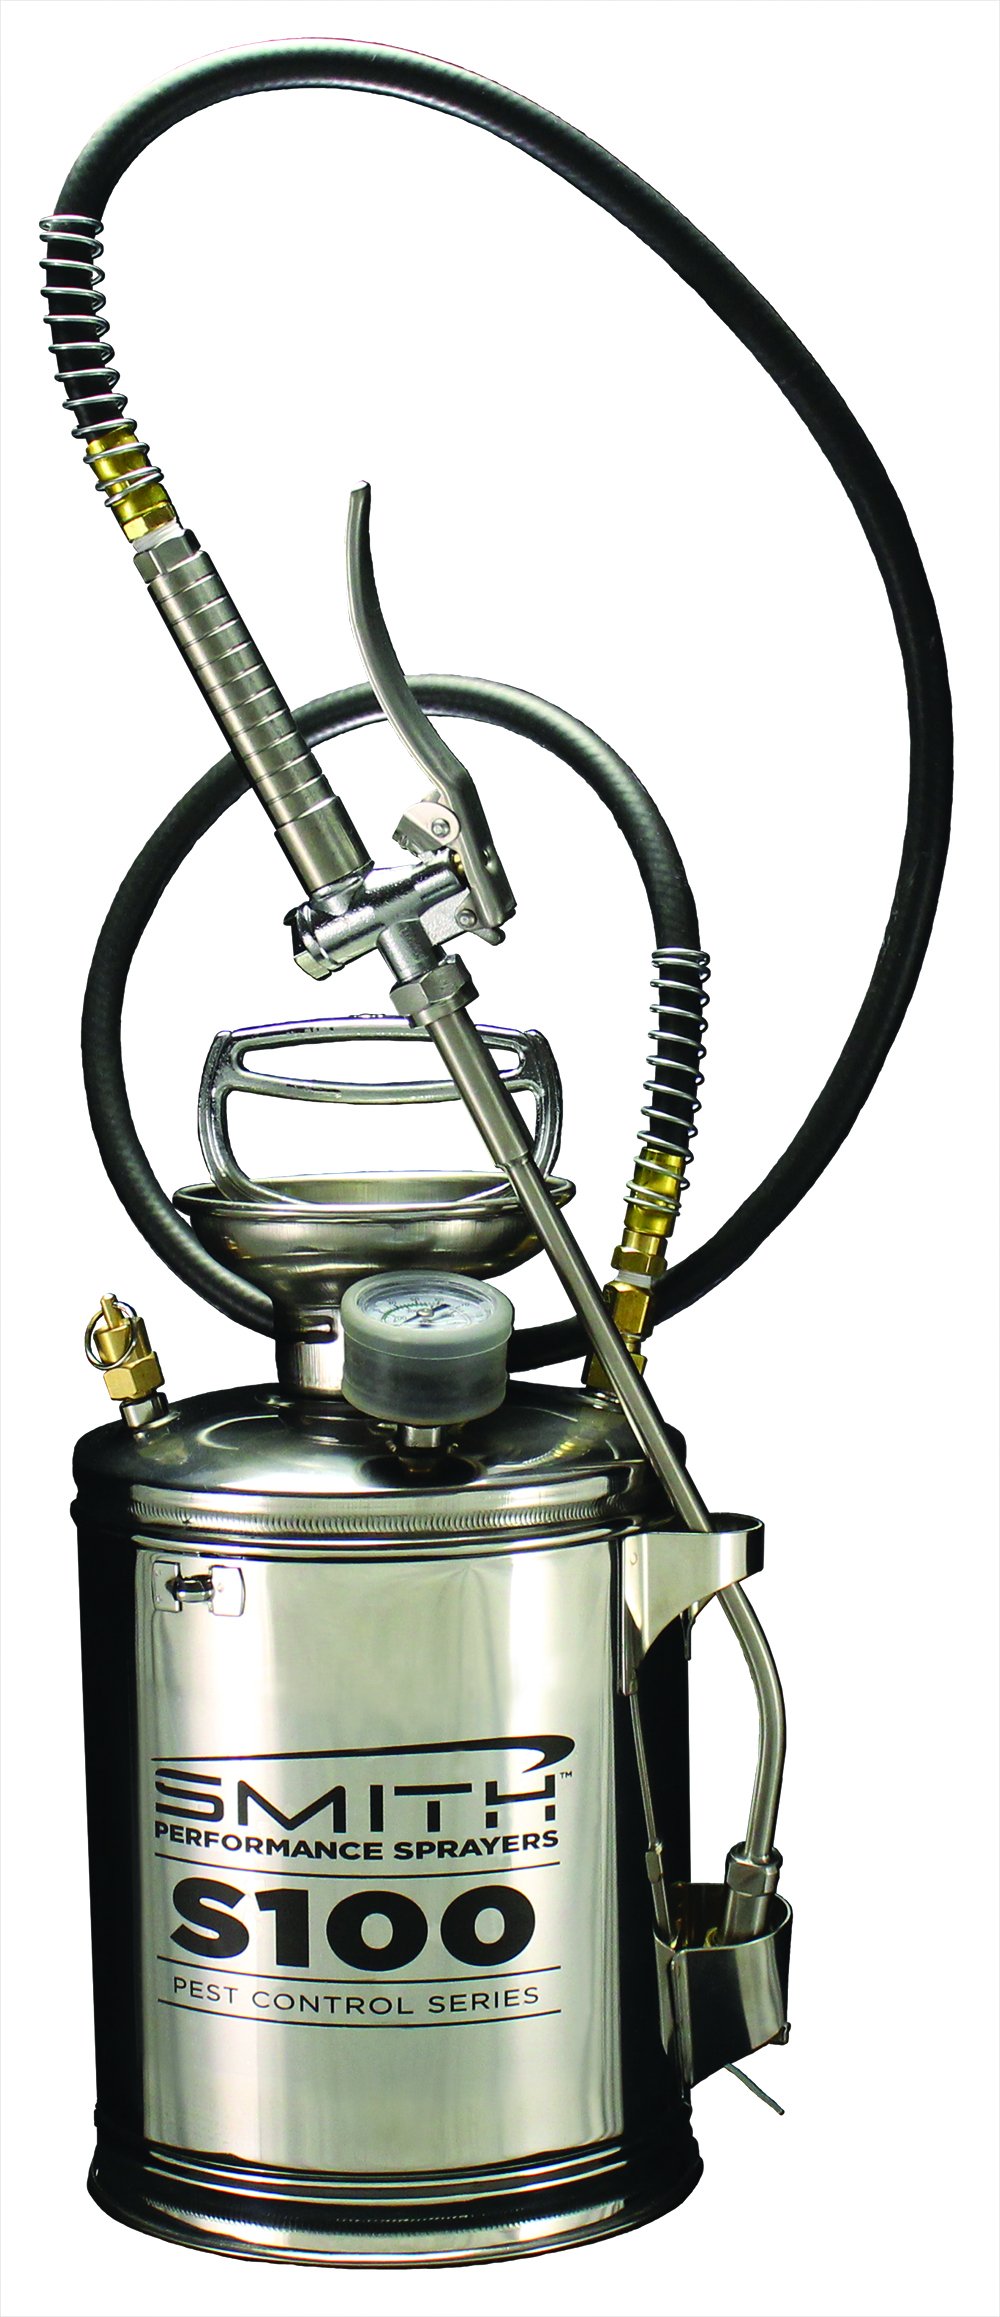 Smith Performance Sprayers S100 1-Gallon Stainless Steel Compression Sprayer for Pest Control